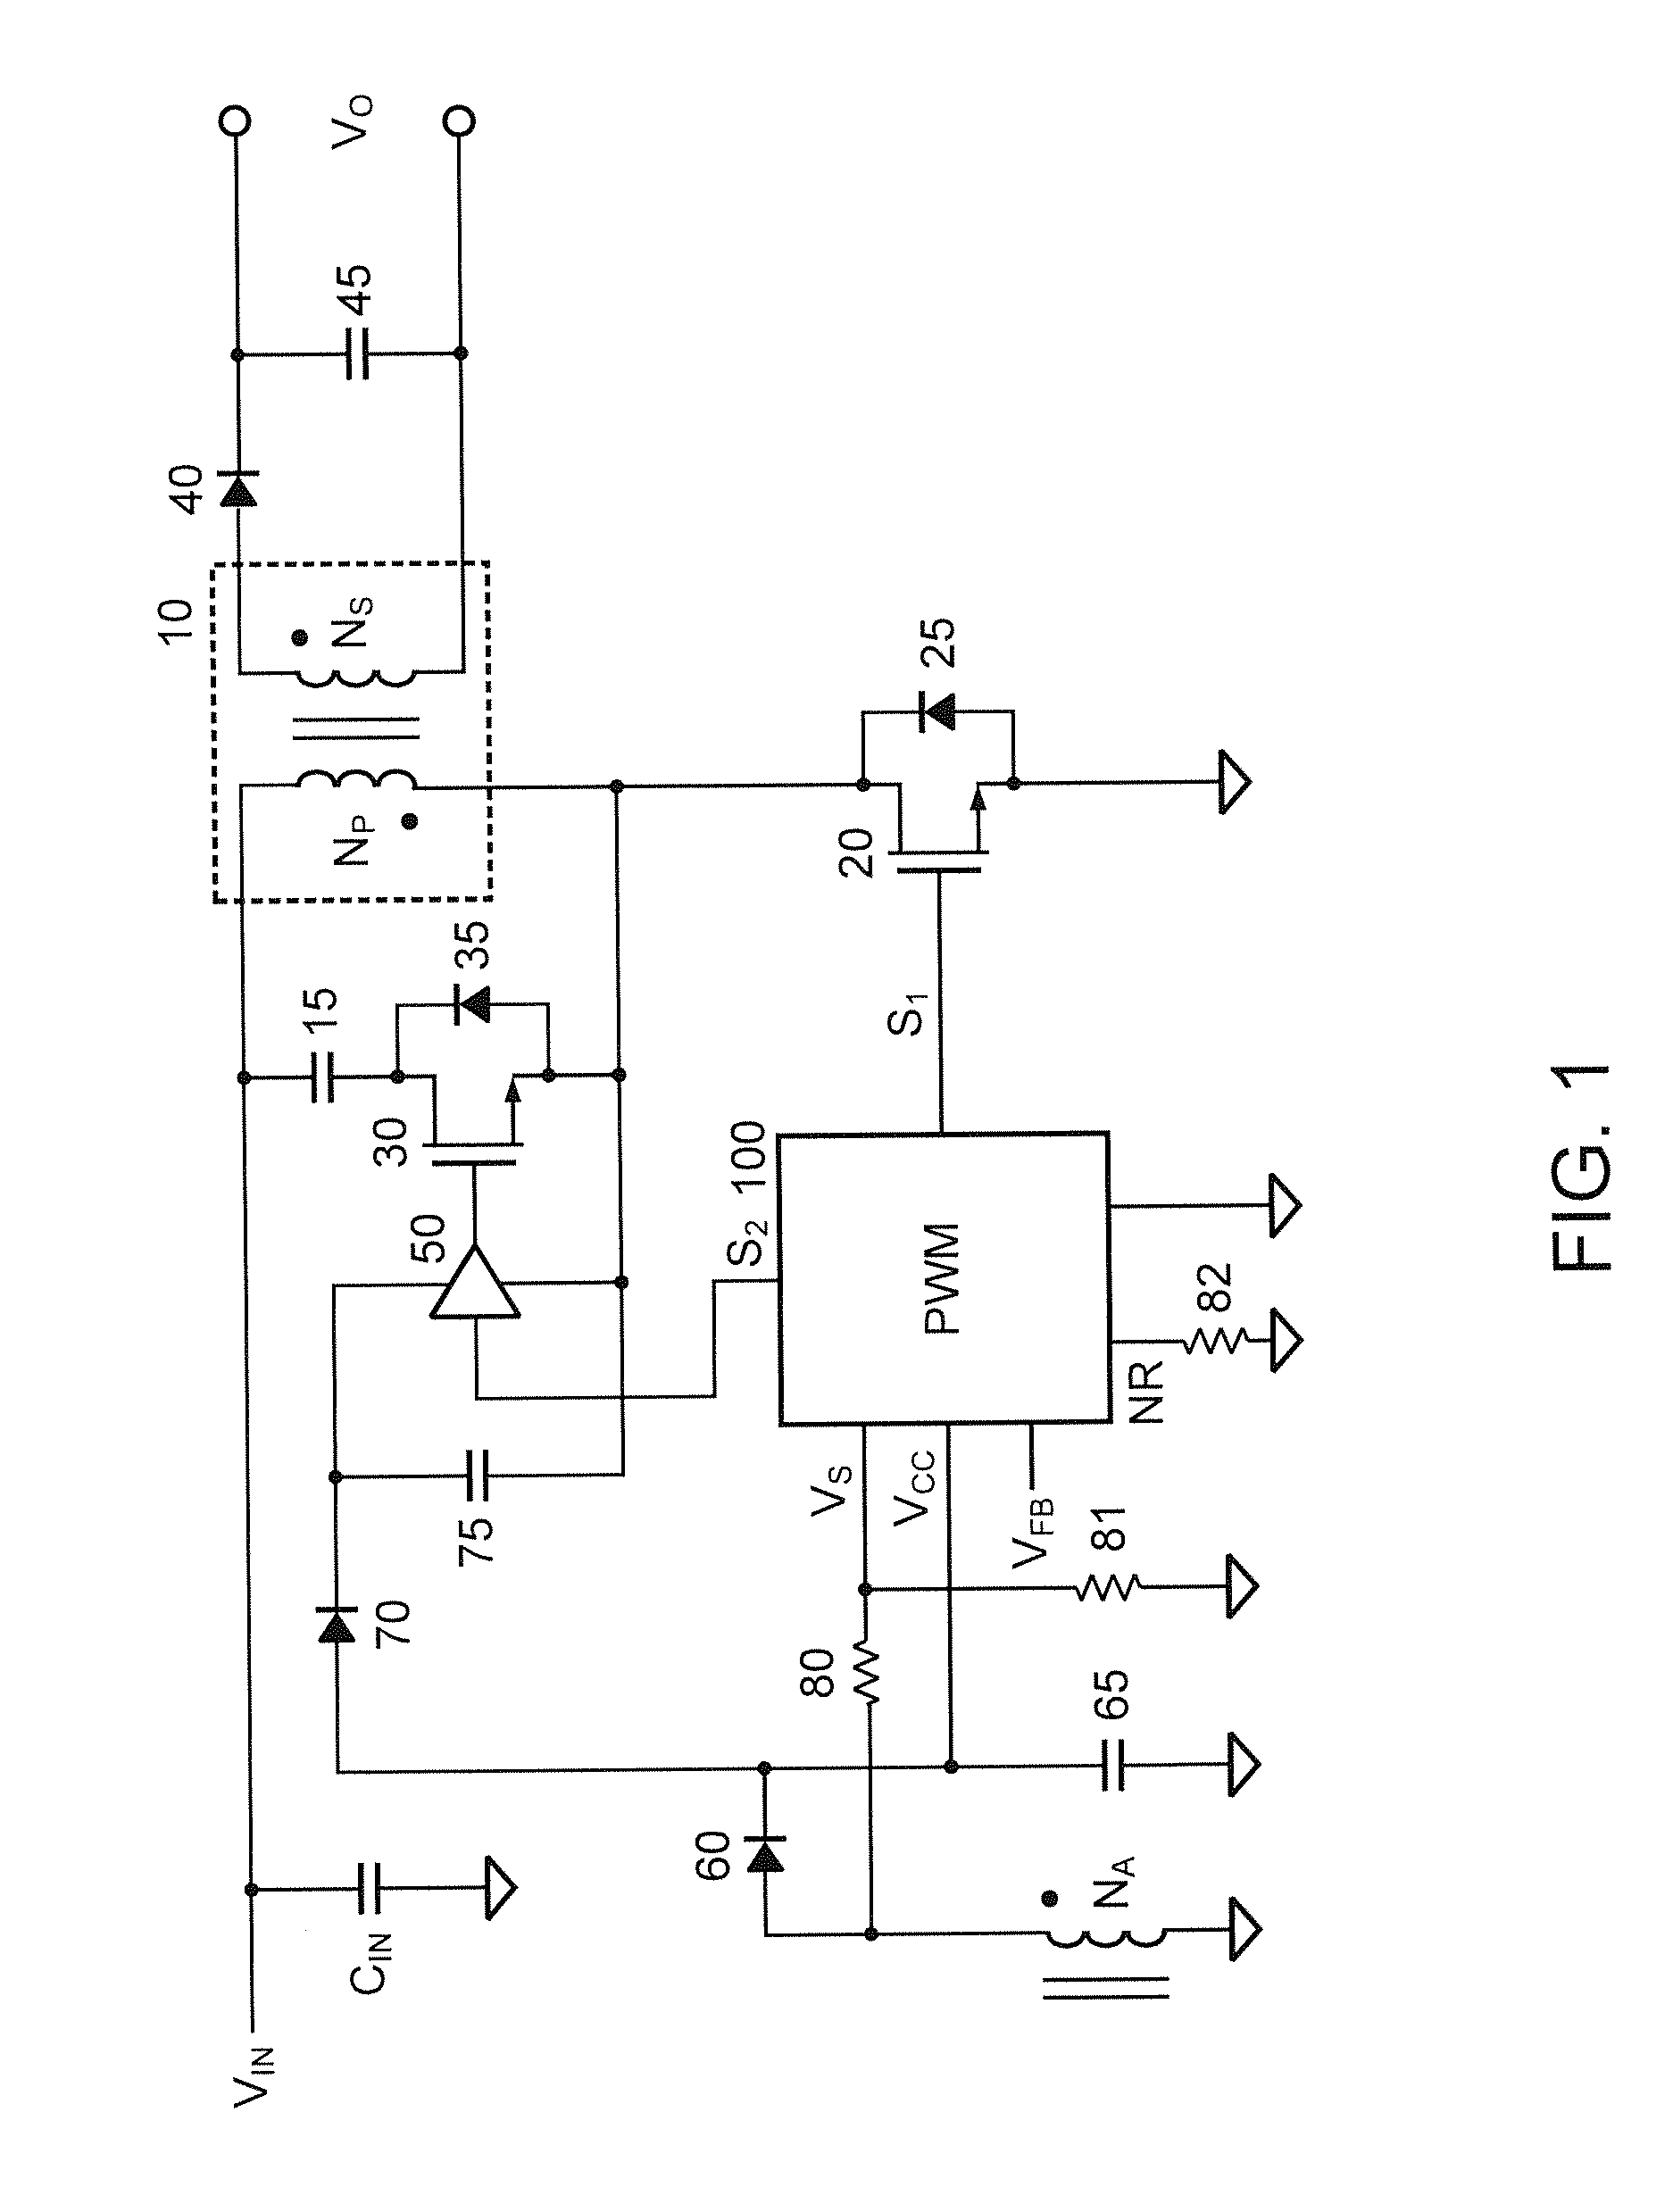 Control circuit for active clamp flyback power converter with predicted timing control